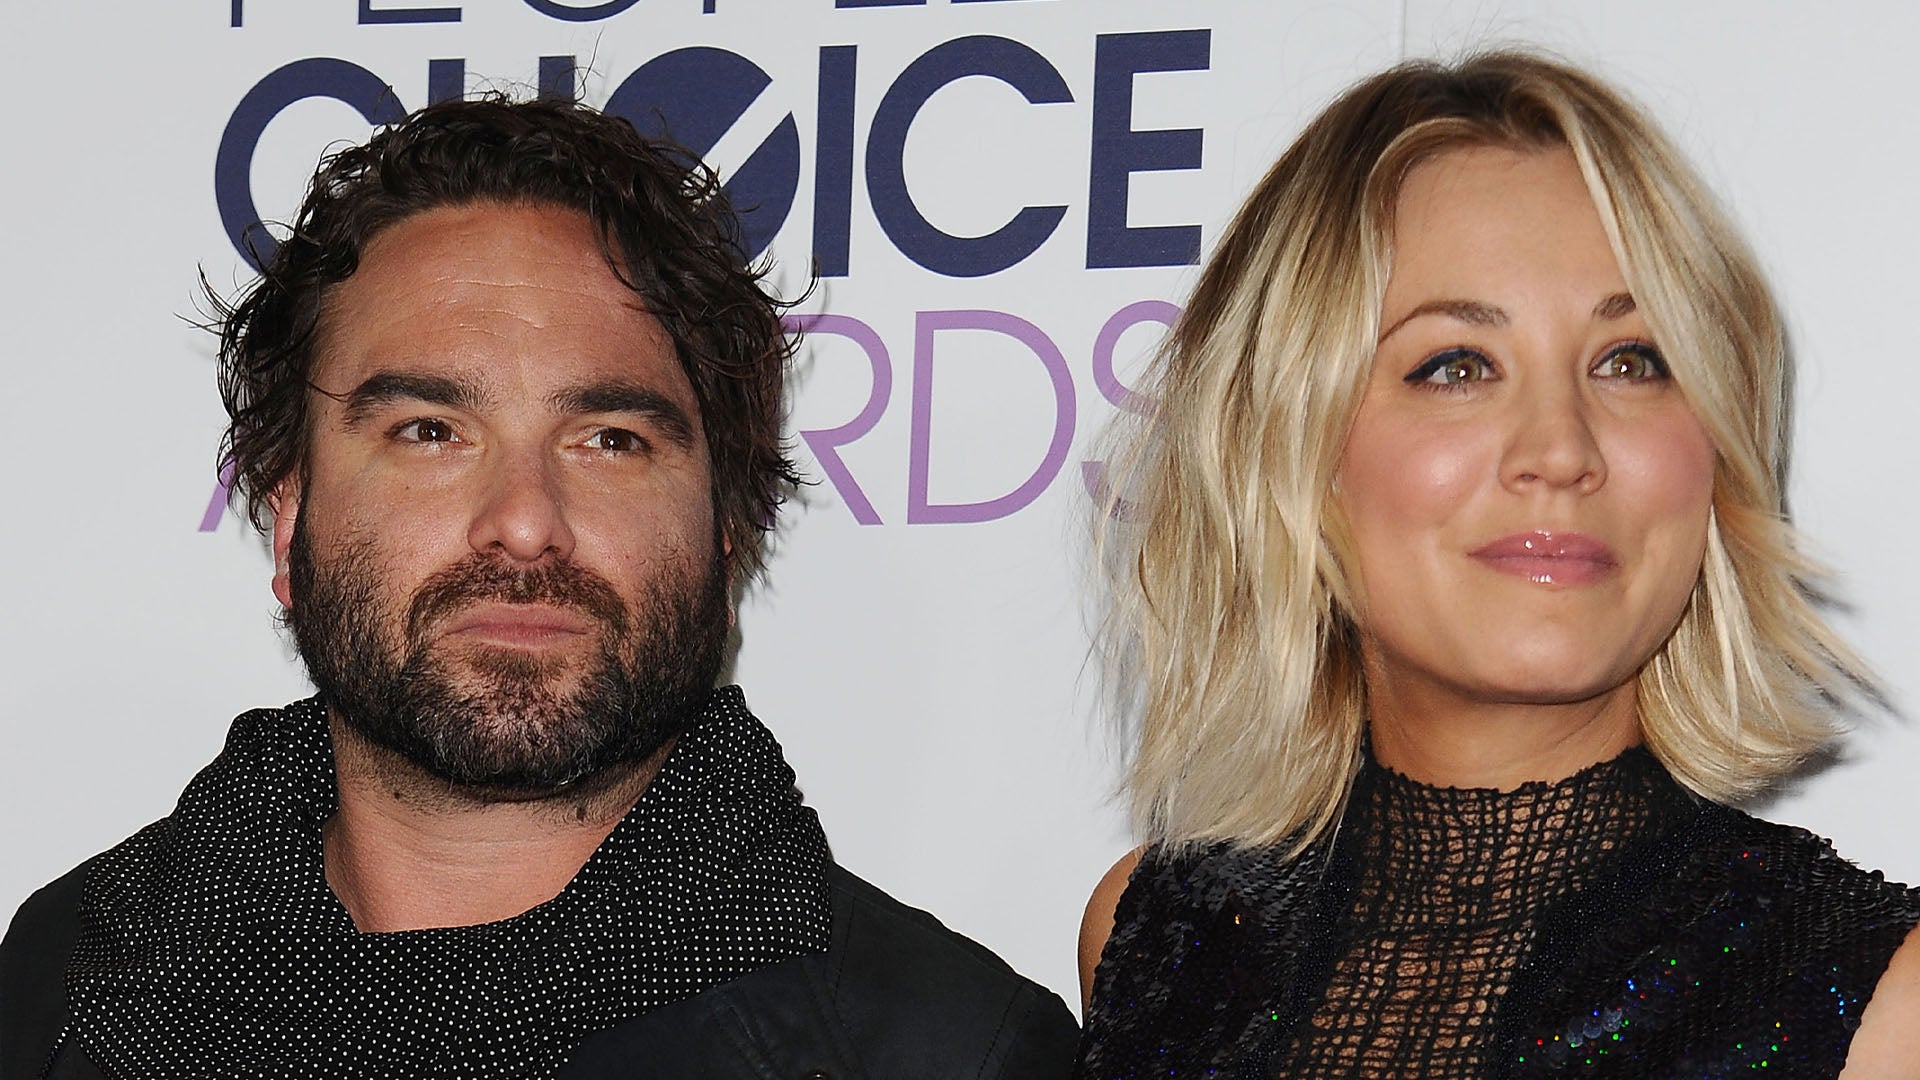 Kaley Cuoco Blowjob Sex - Kaley Cuoco, Johnny Galecki Reveal the 'Big Bang Theory' Episode That  Started Their Real-Life Romance | Entertainment Tonight